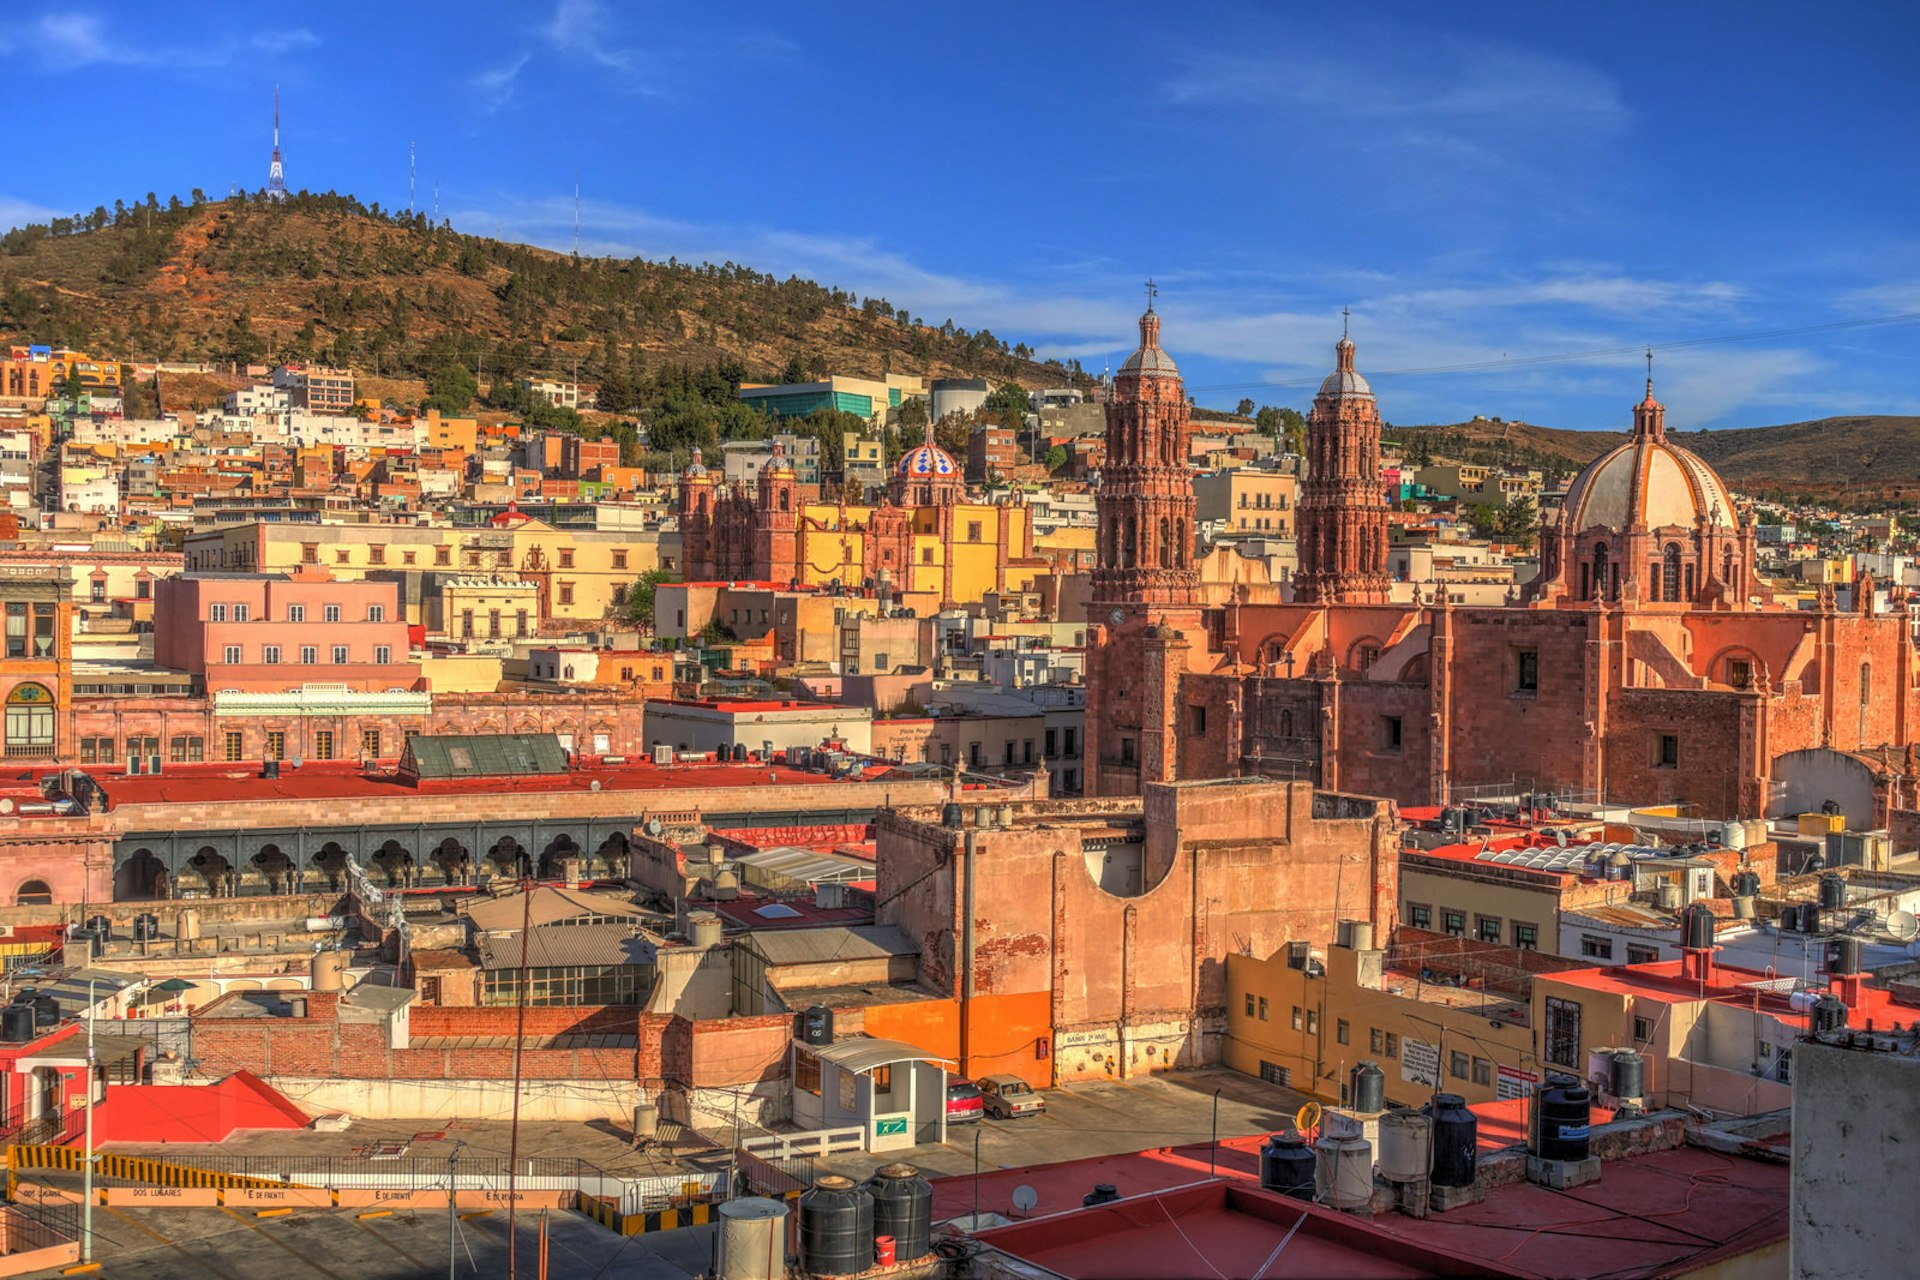 Aerial view of the city of Zacatecas, Mexico